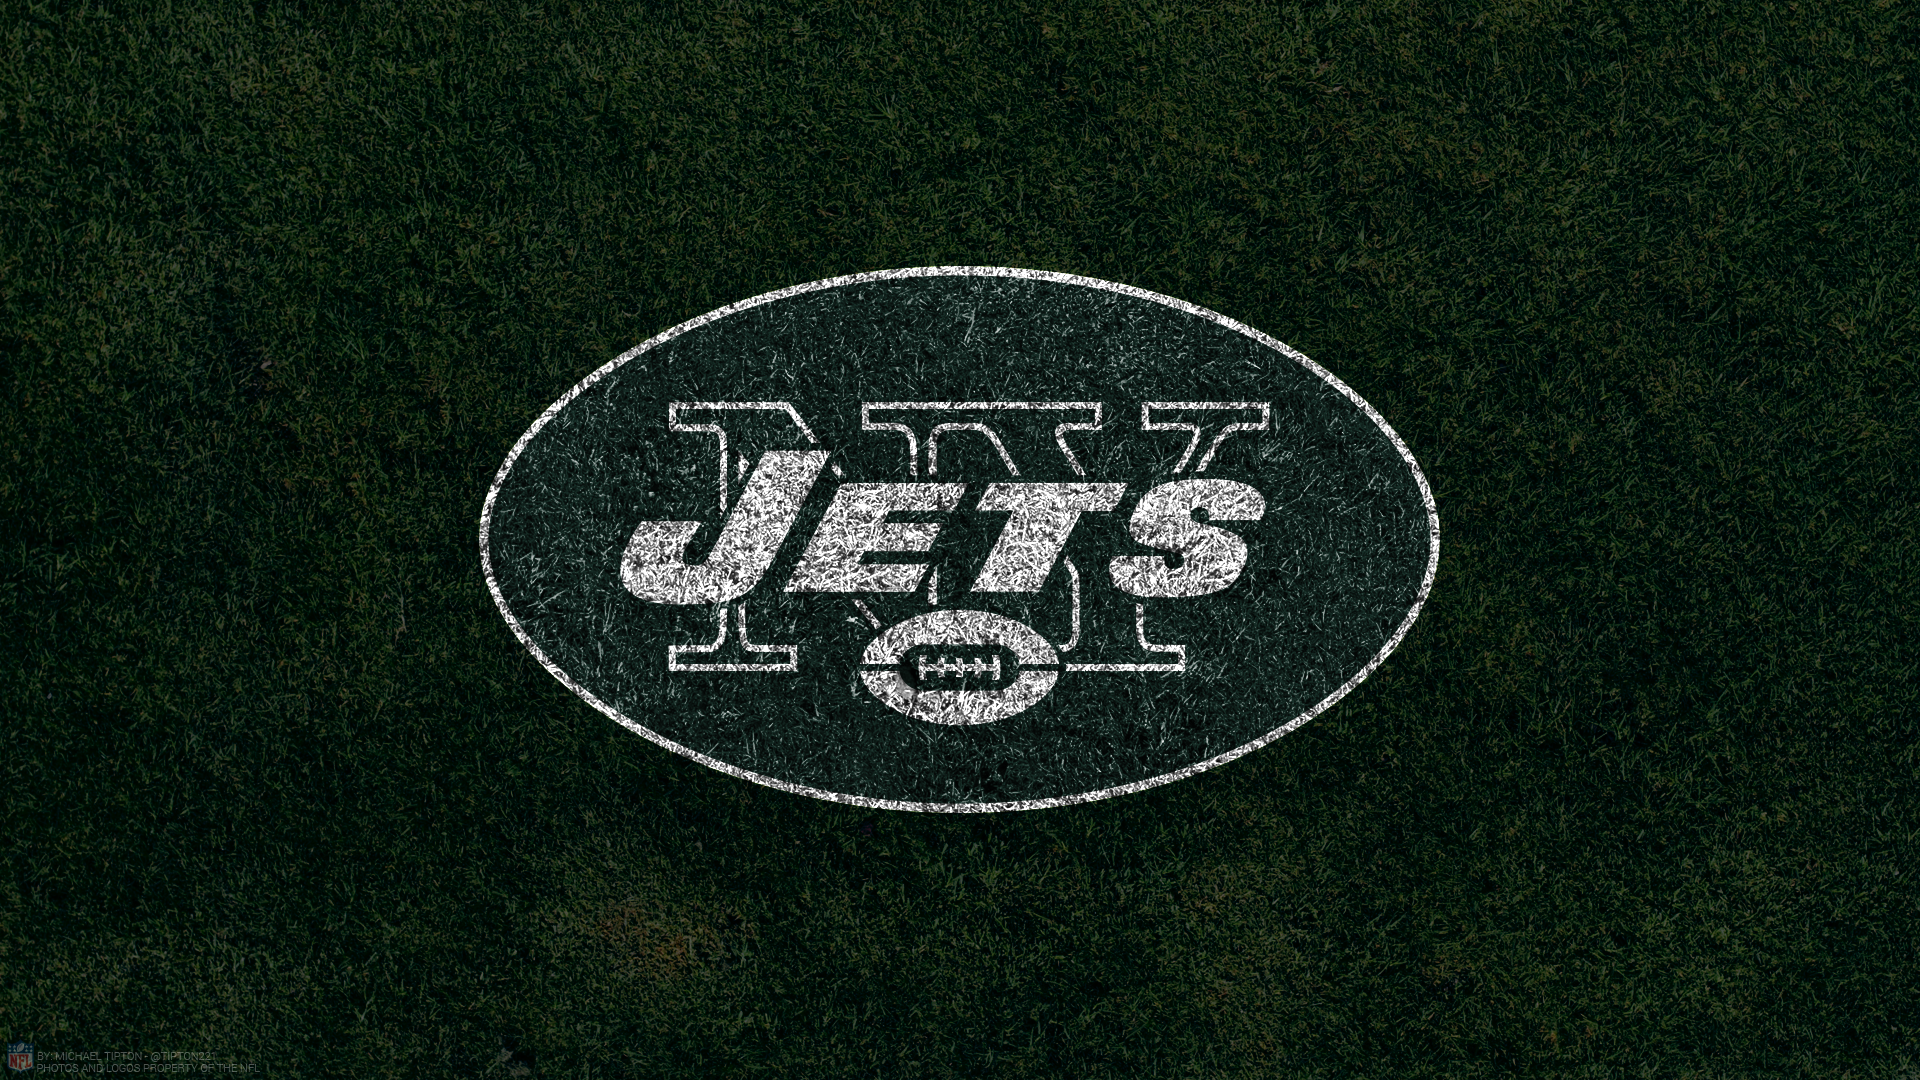 New York Jets Wallpaper Pc iPhone Android